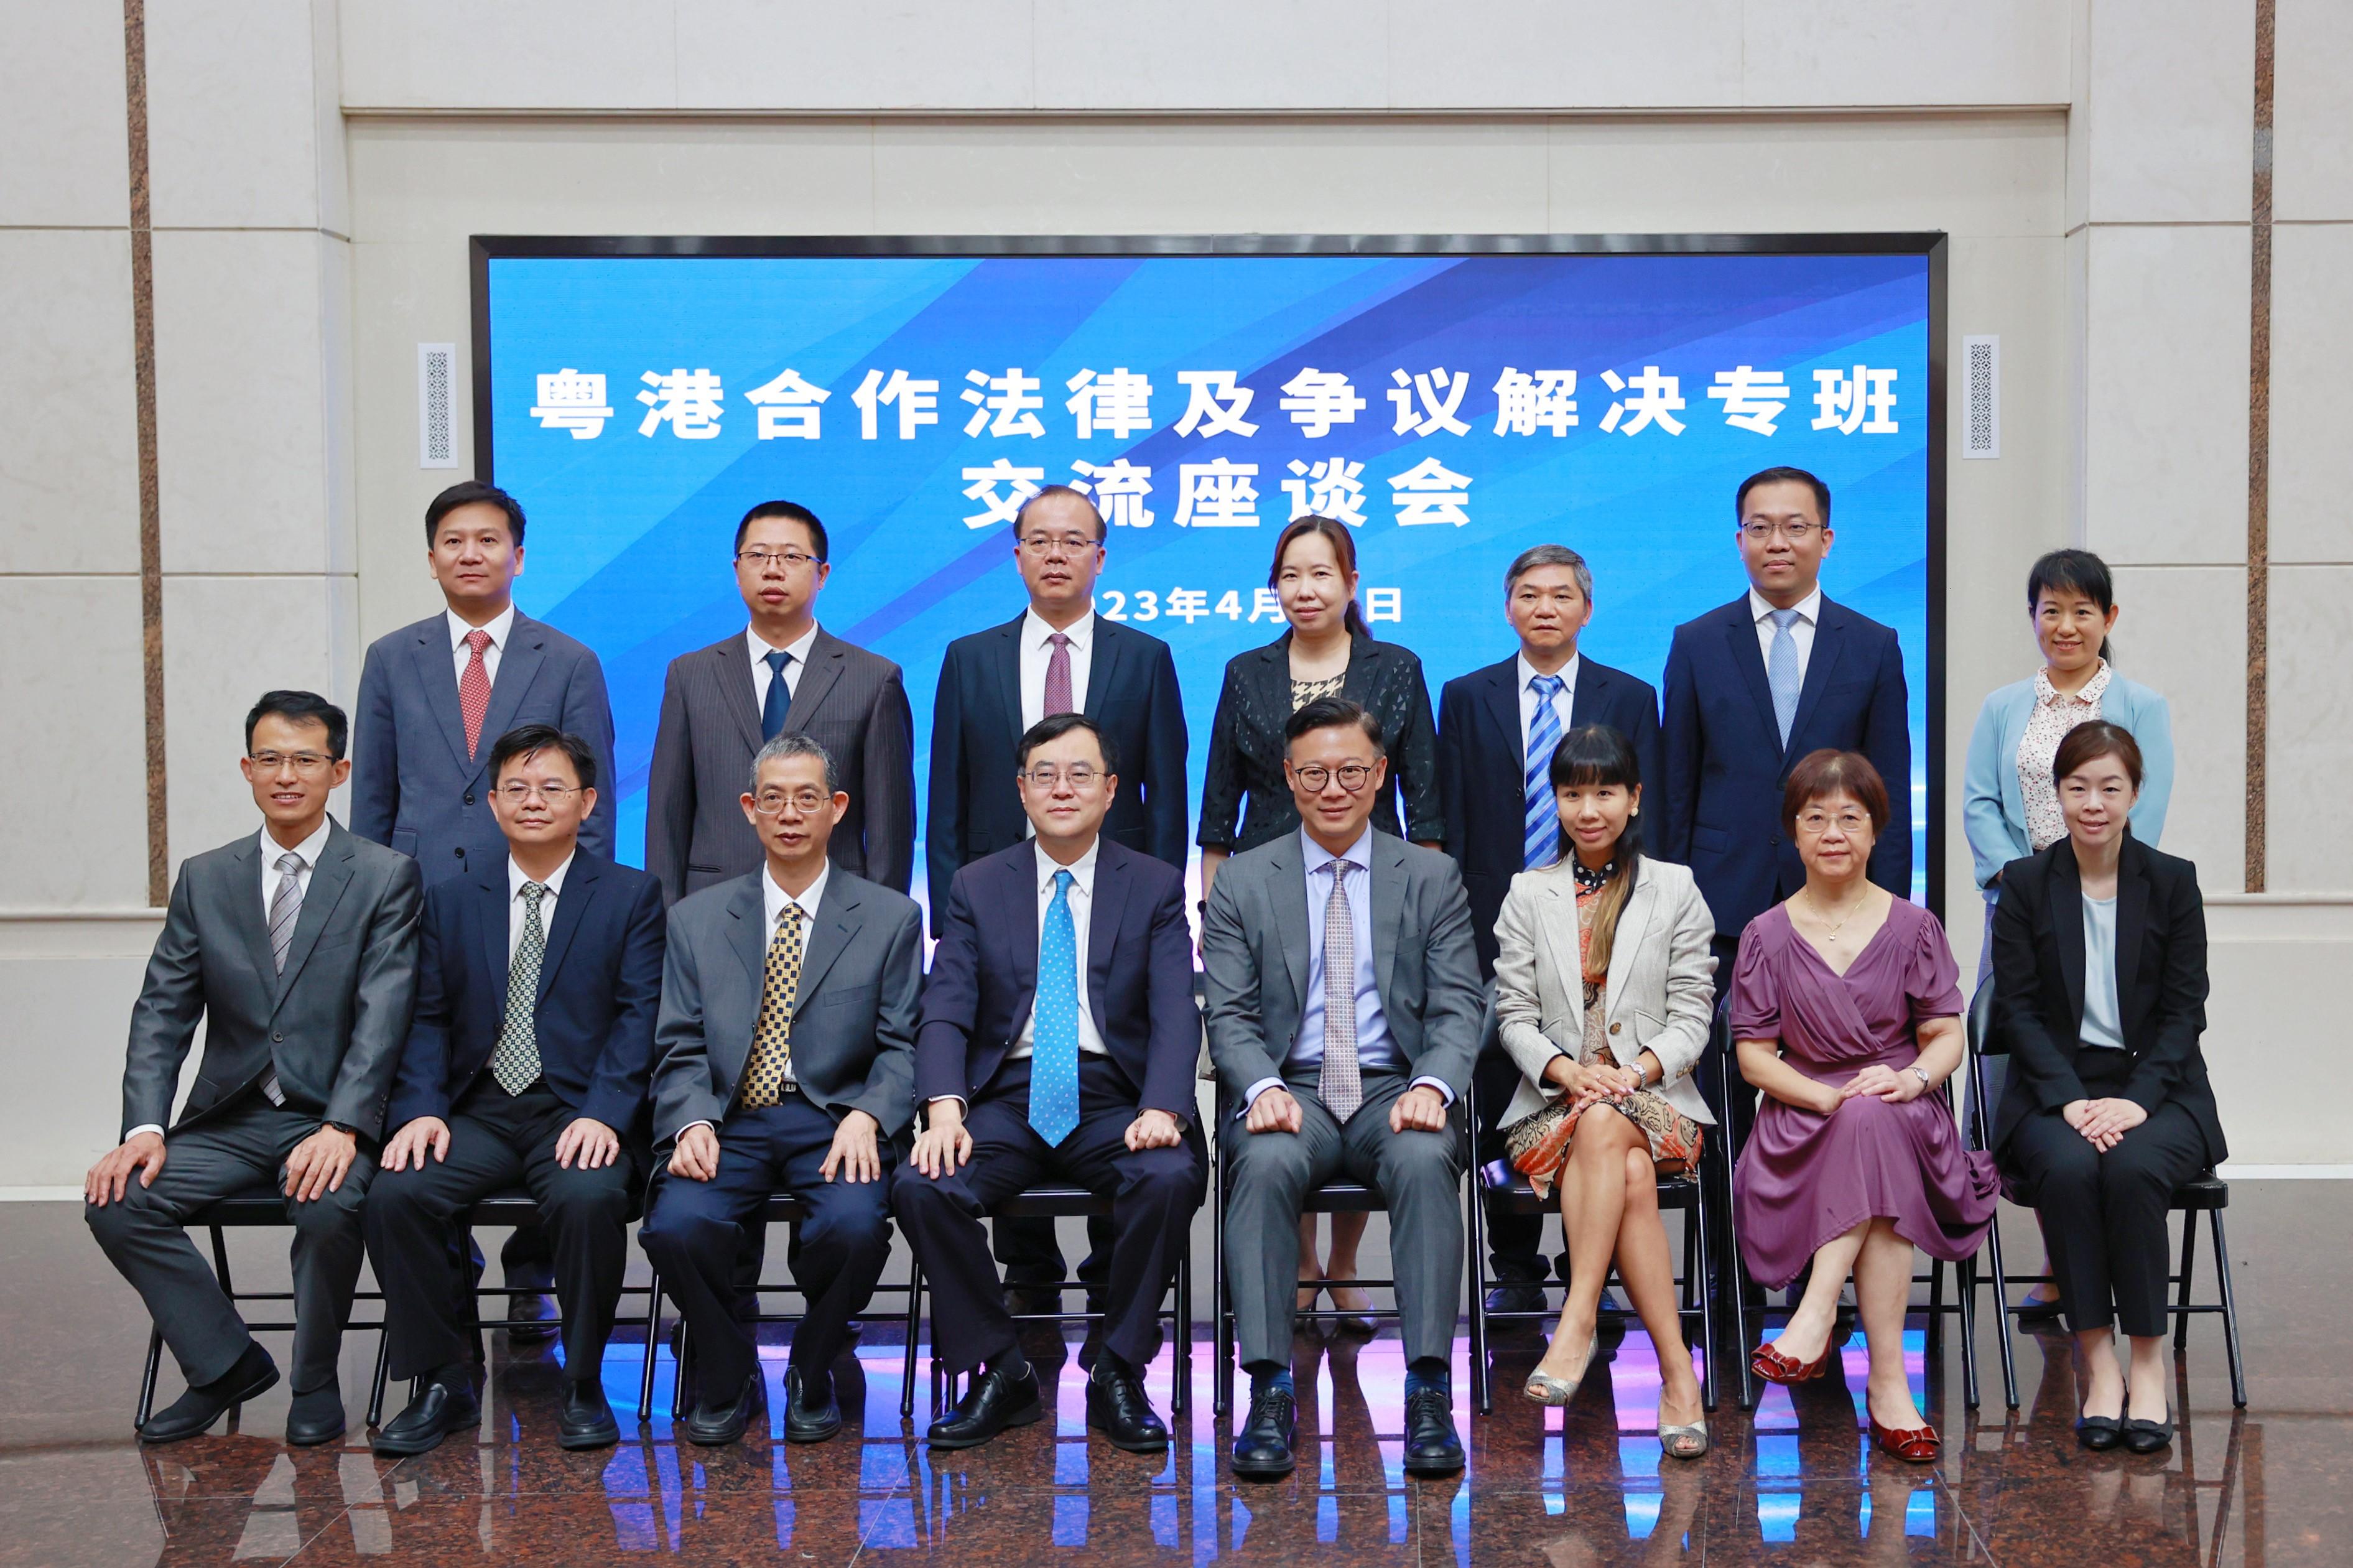 The Deputy Secretary for Justice, Mr Cheung Kwok-kwan, called on the Department of Justice of Guangdong Province today (April 19) in Guangzhou to discuss further collaboration on legal and dispute resolutions in the Guangdong-Hong Kong-Macao Greater Bay Area. Photo shows Mr Cheung (front row, fourth right) with the Director-General of the Department of Justice of Guangdong Province, Mr Chen Xudong (front row, fourth left), and other senior officers.